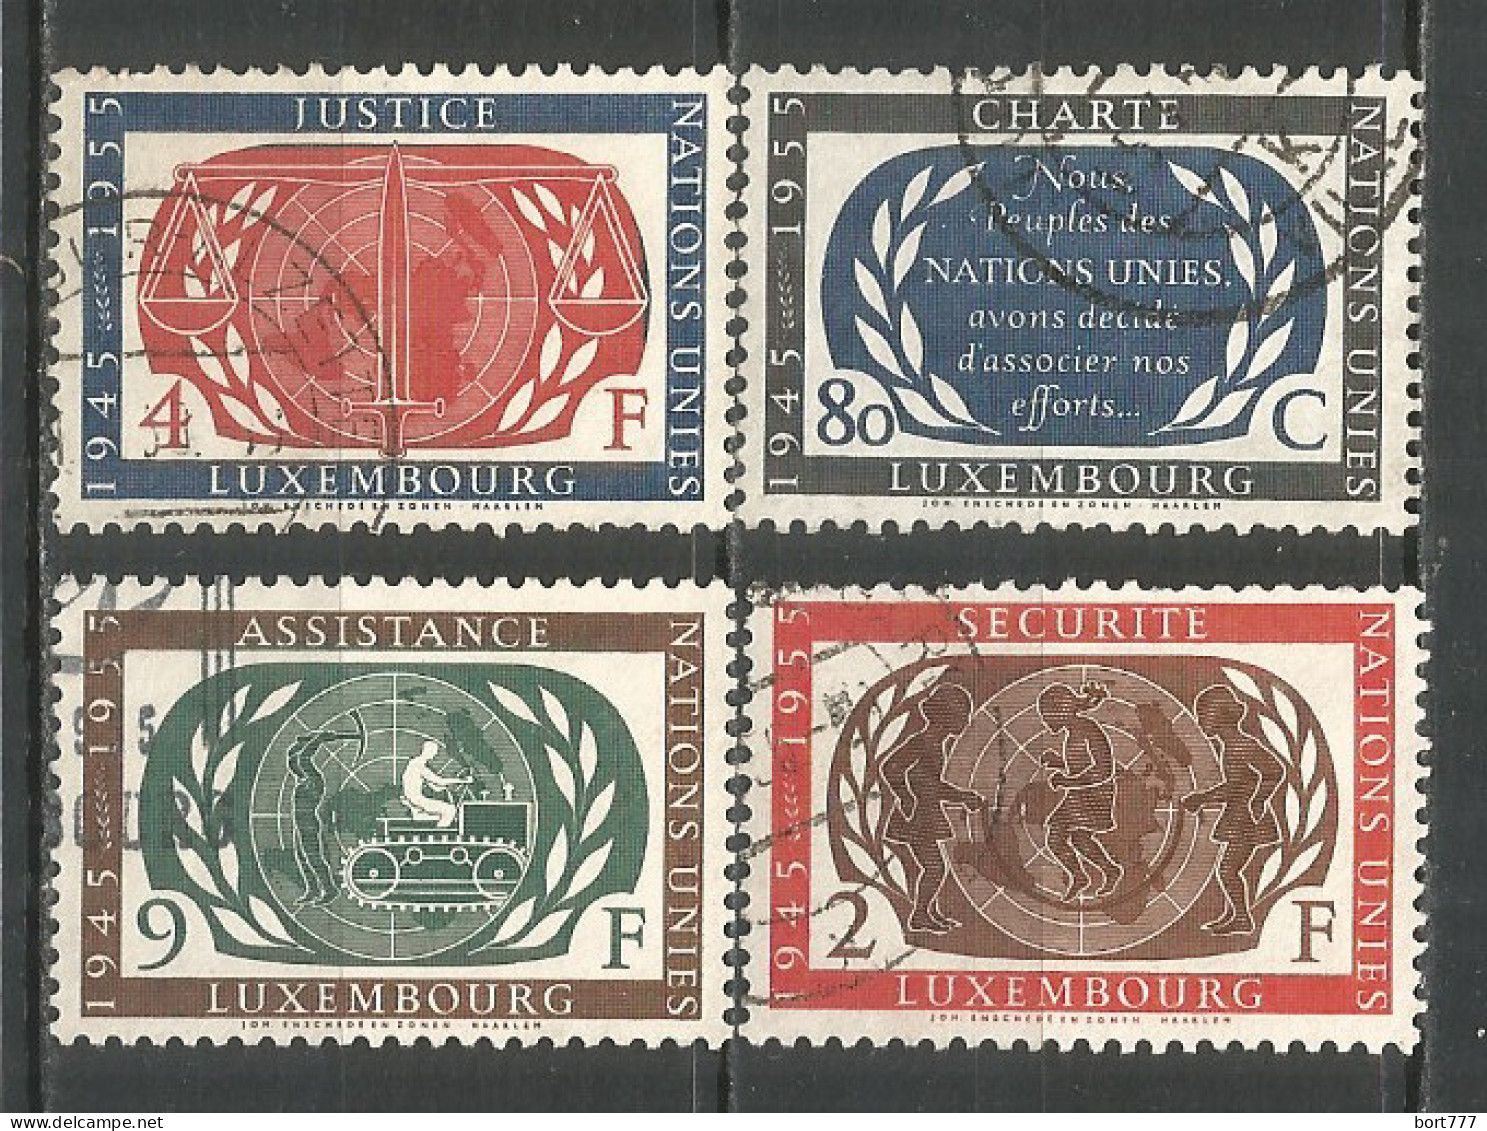 Luxembourg 1955 Used Stamps Set Mi # 537-540 - Used Stamps